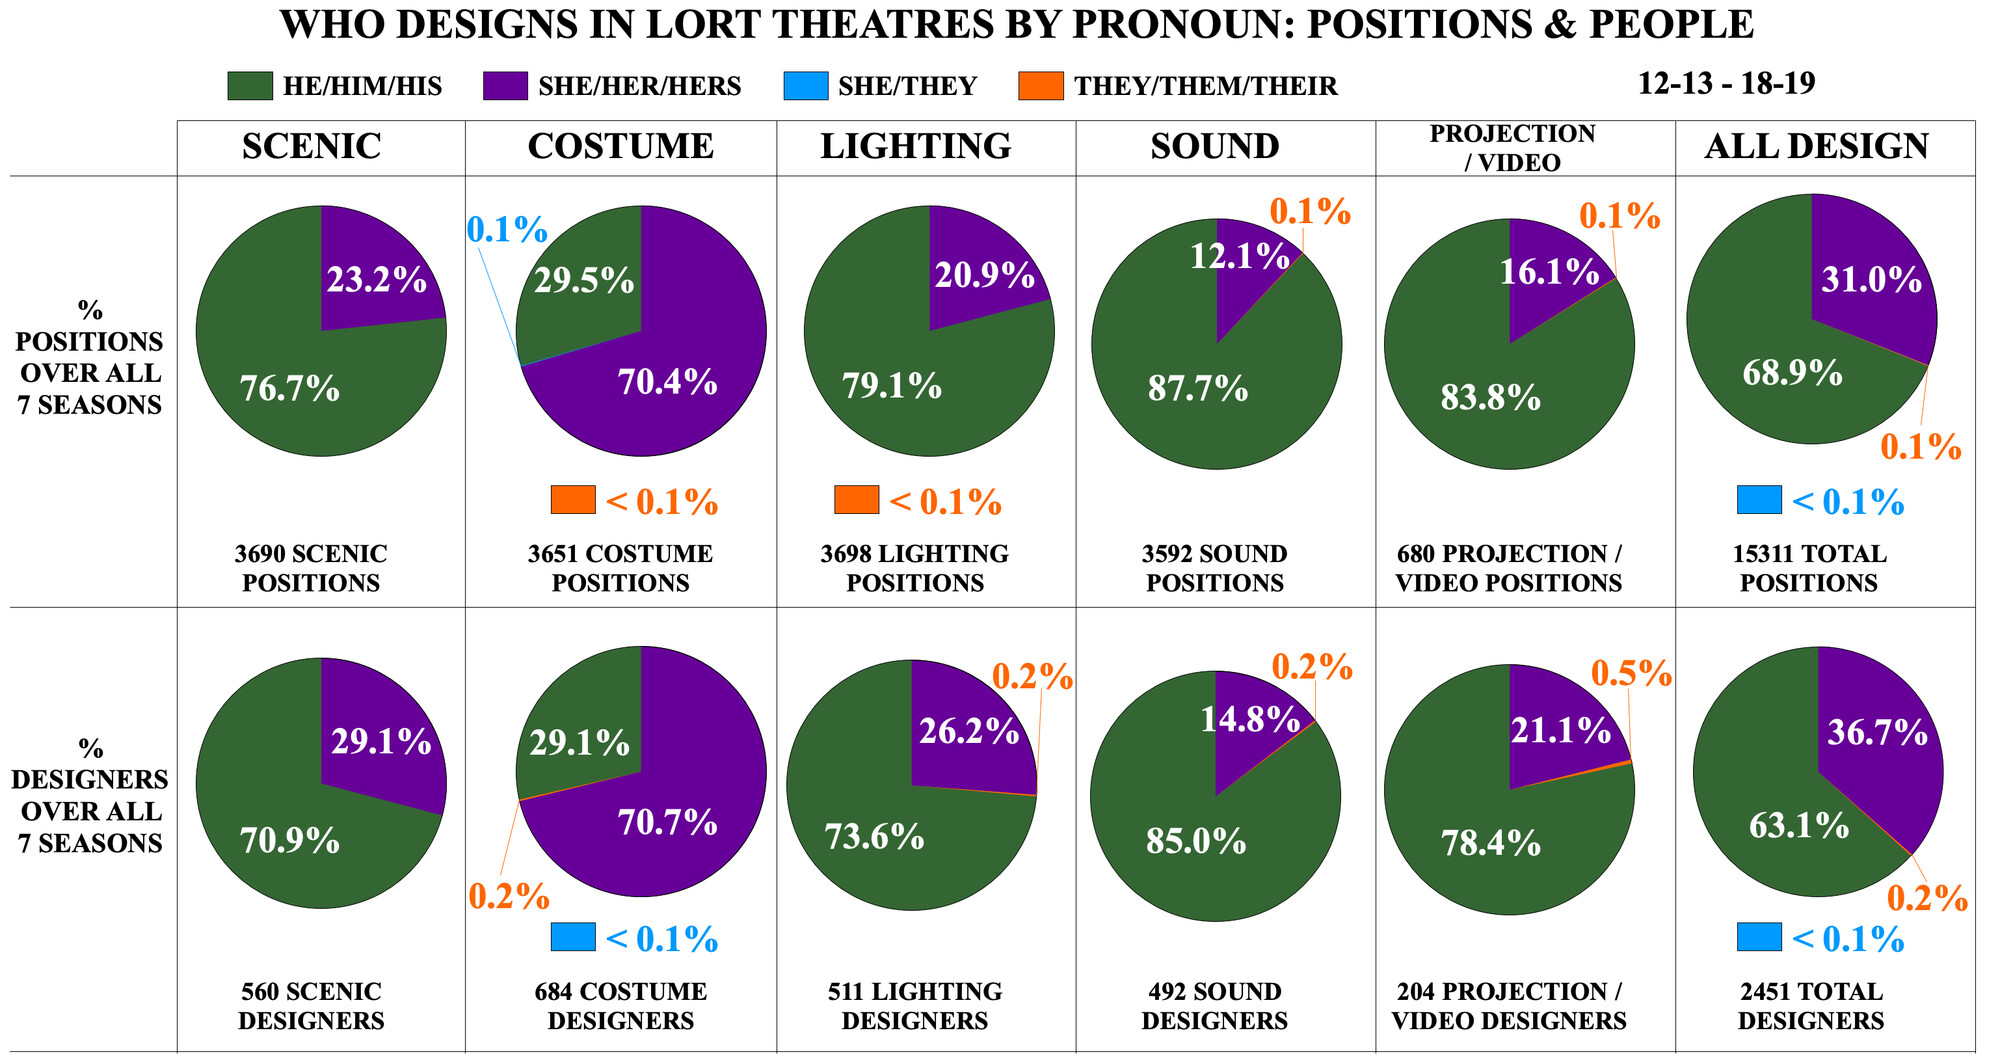 Who Designs in LORT Theatres by Pronoun: Positions and People